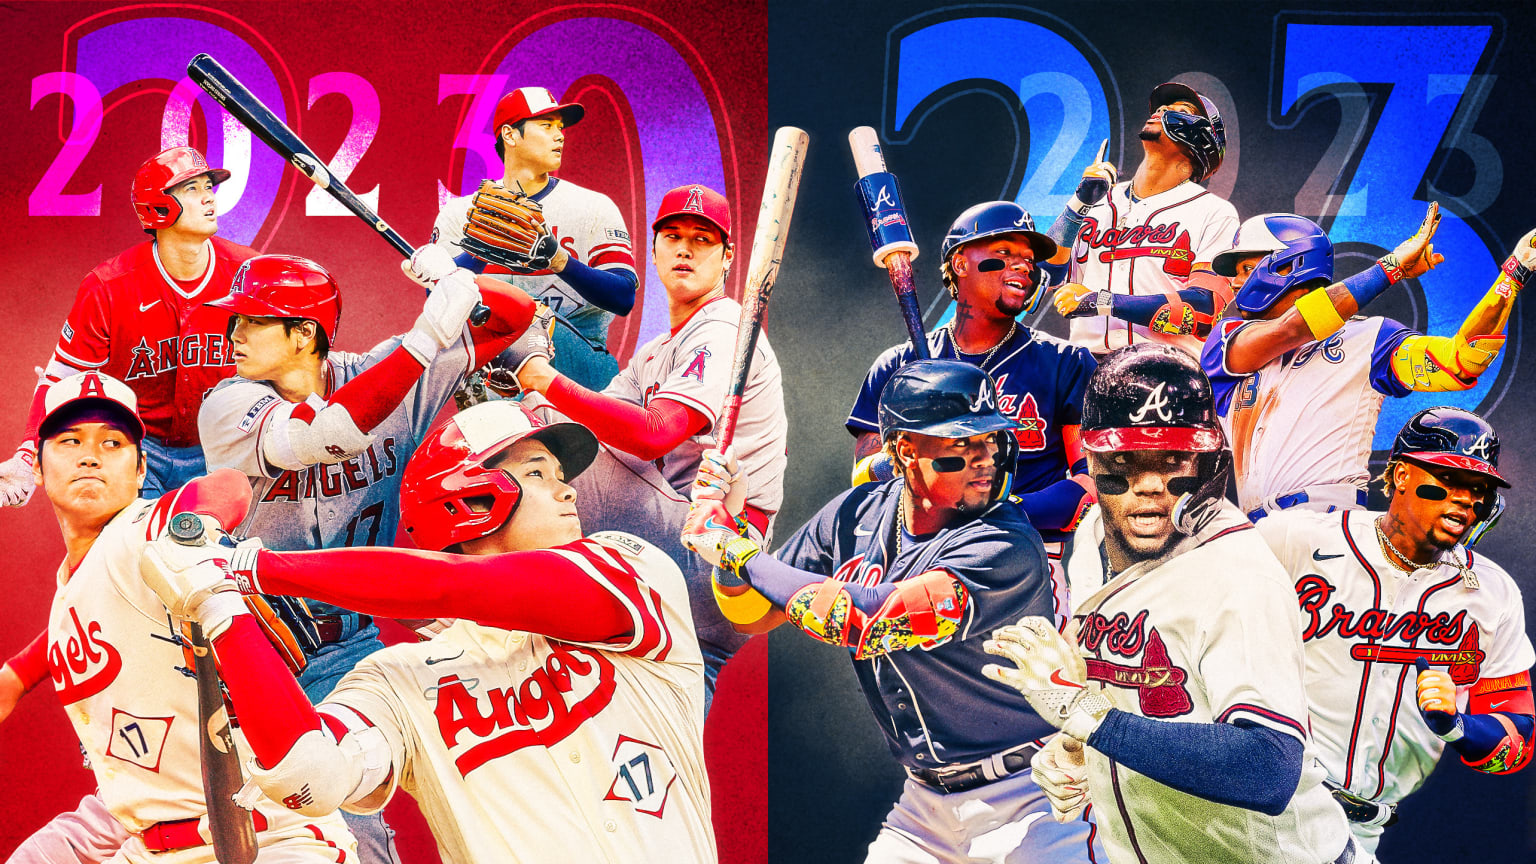 A designed image showing multiple action shots of Shohei Ohtani on the left and Ronald Acuña Jr. on the right